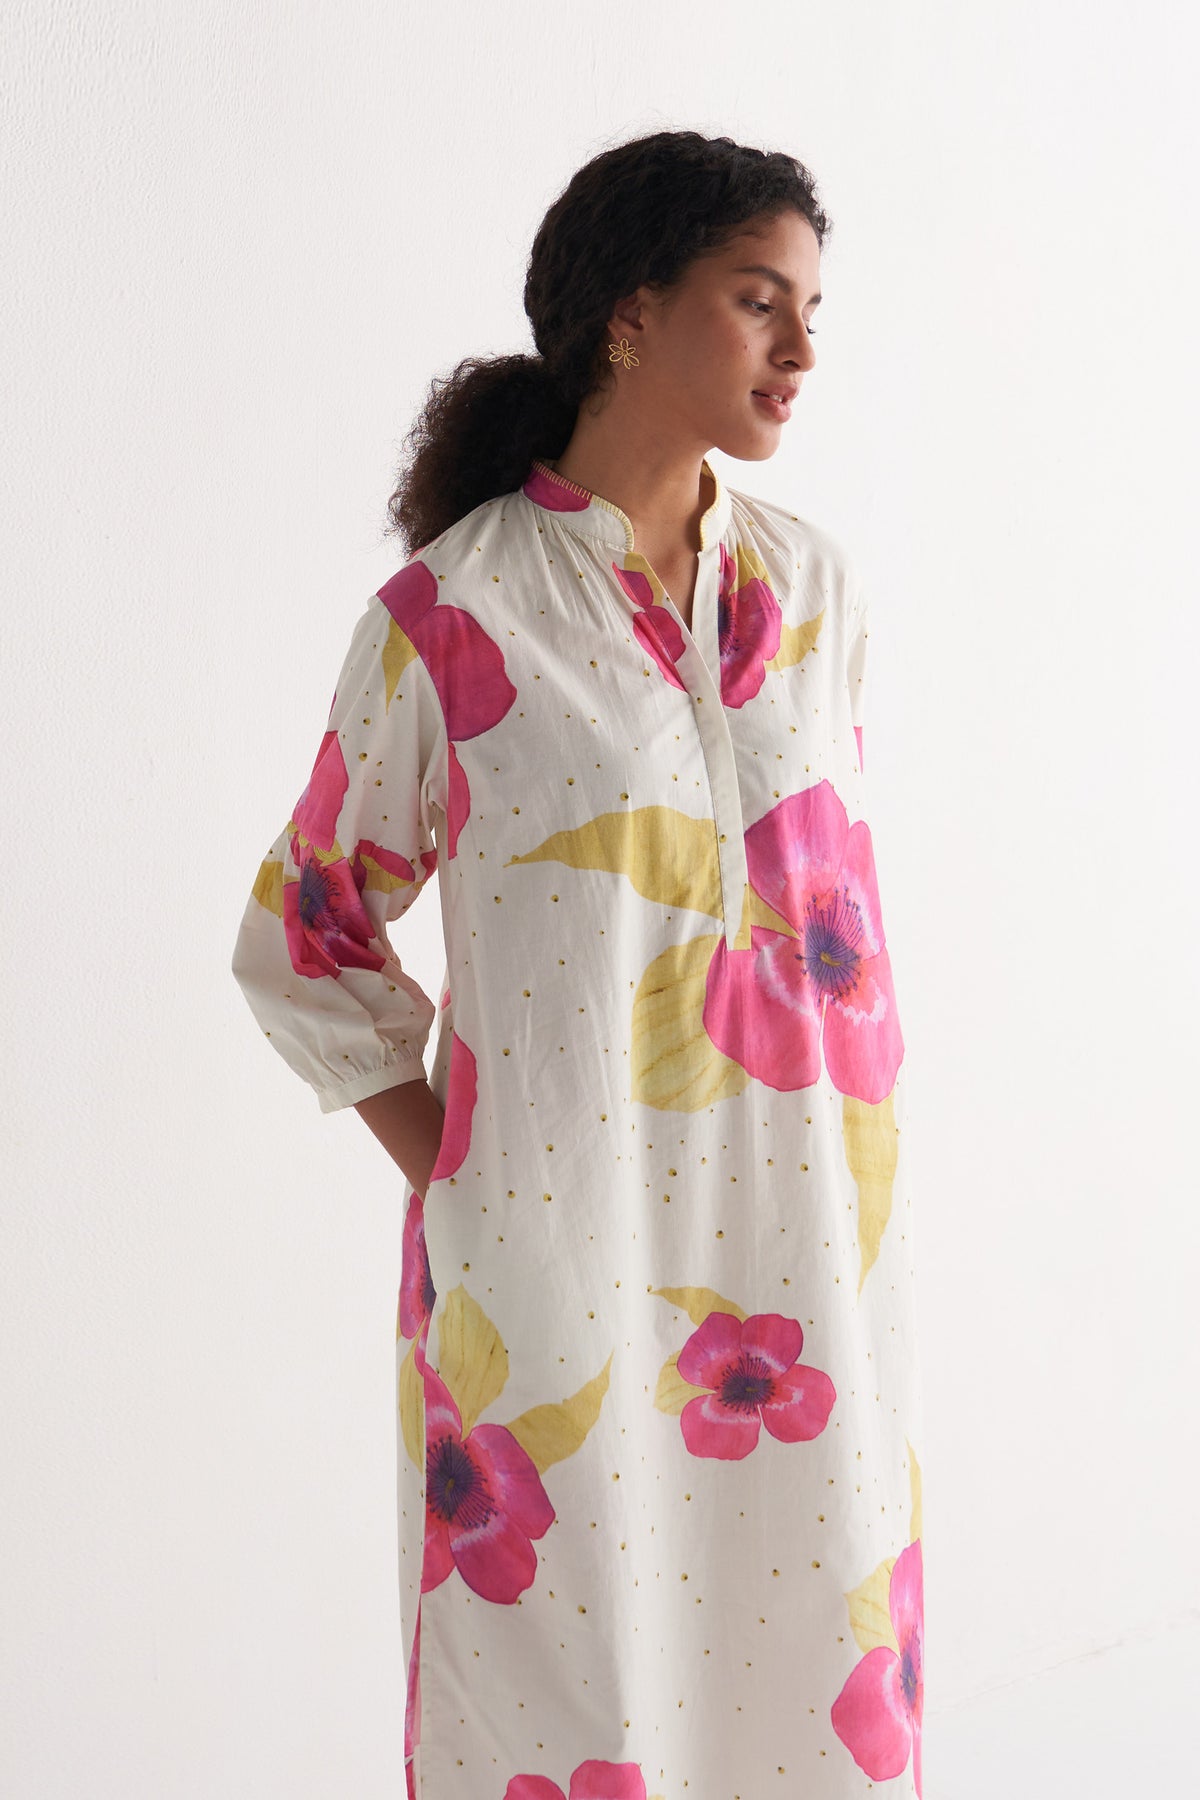 Pinkberry Floral Shirtdress with pants